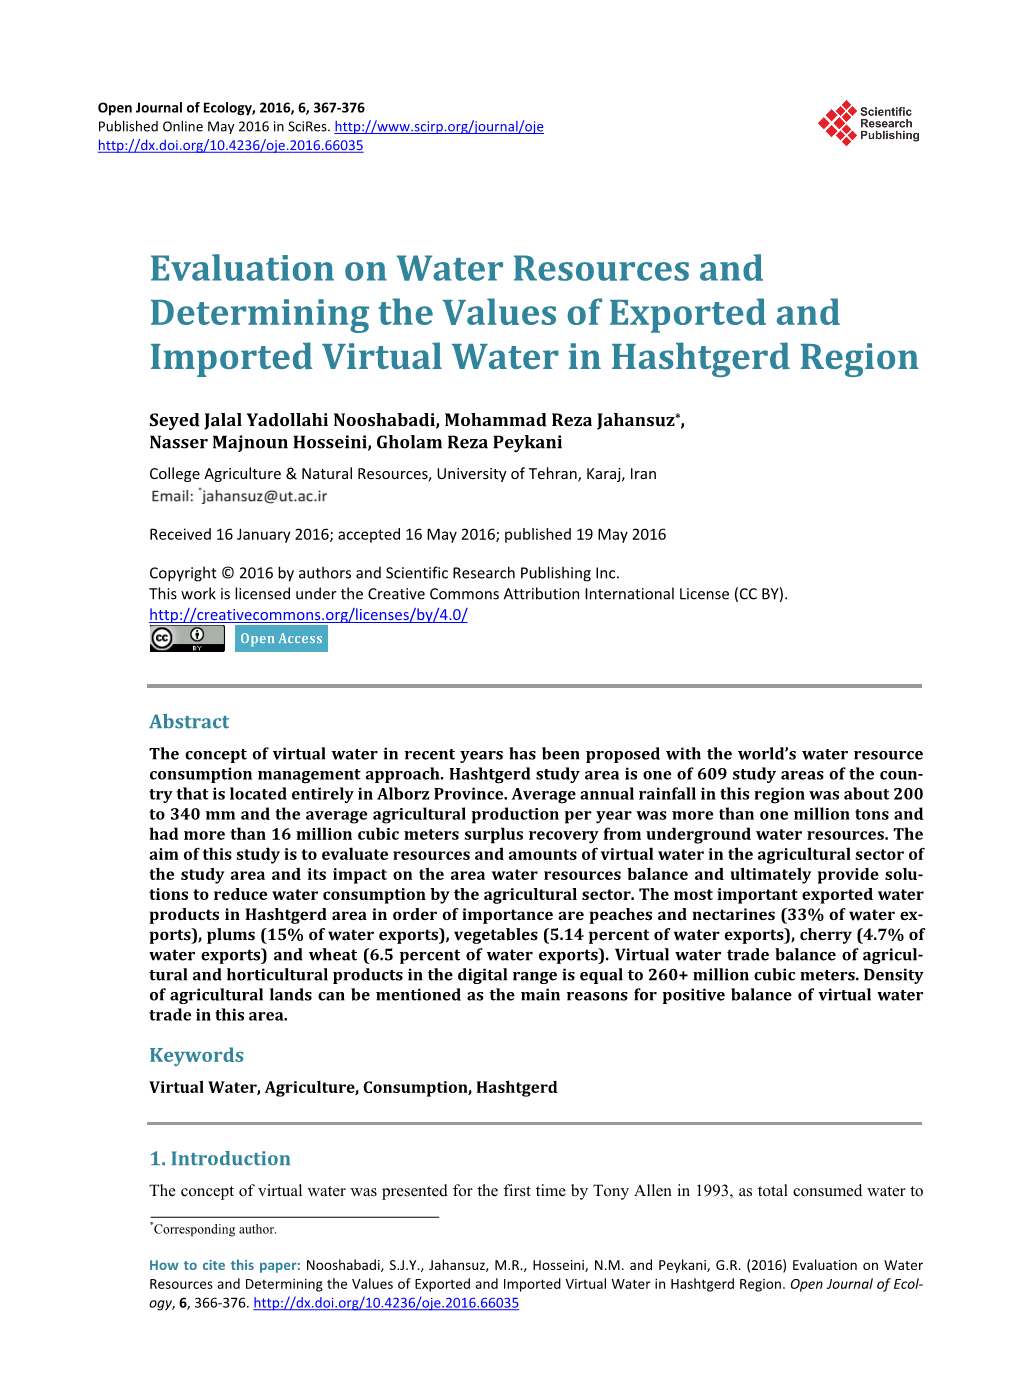 Evaluation on Water Resources and Determining the Values of Exported and Imported Virtual Water in Hashtgerd Region